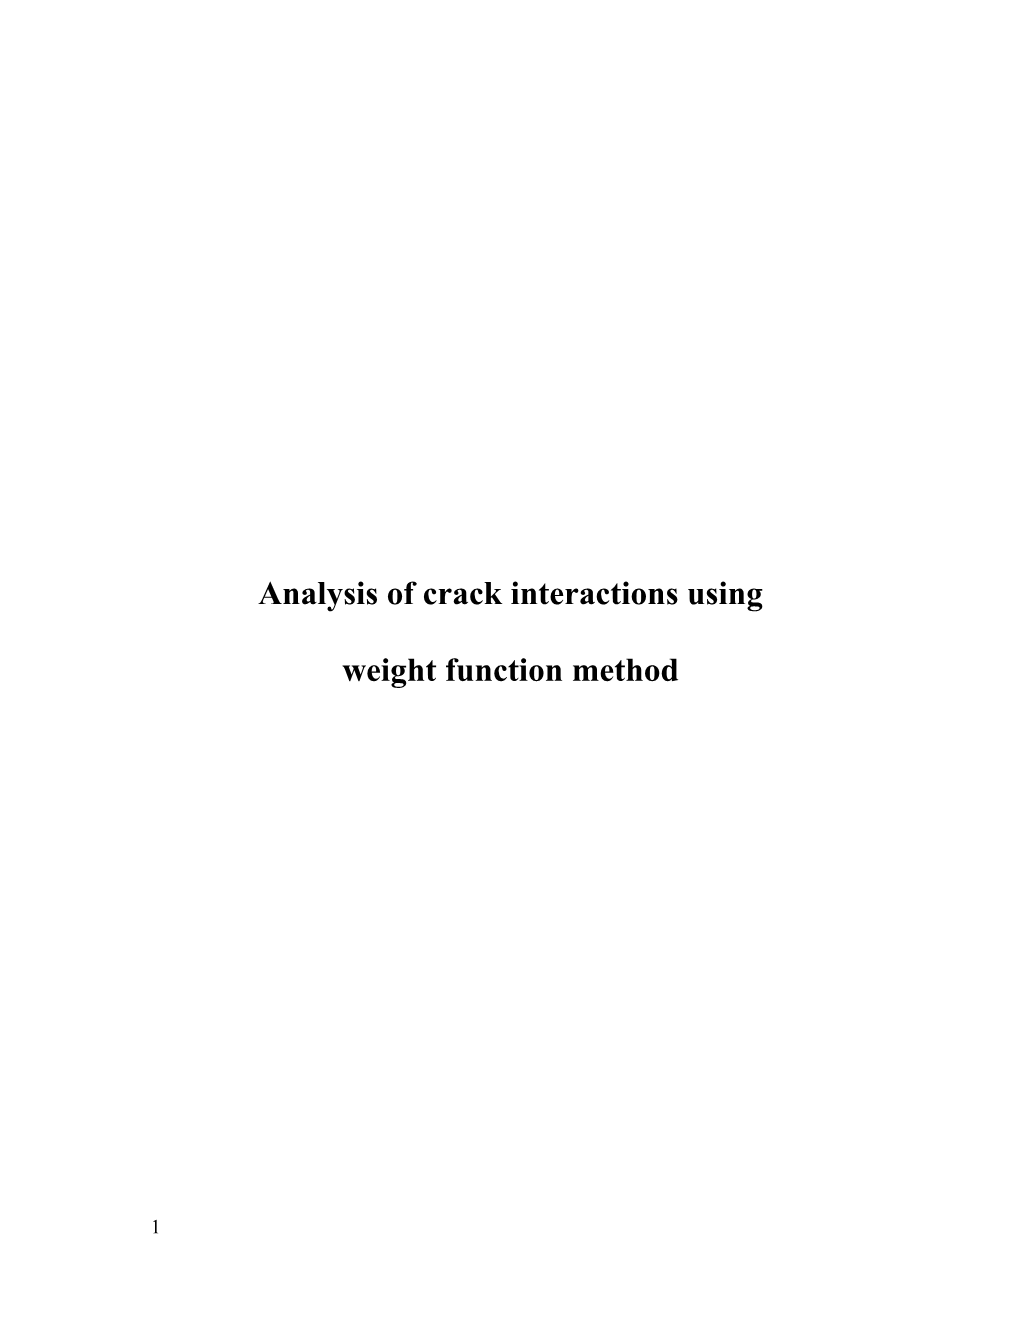 Analysis of Crack Interactions Using Weight Function Method